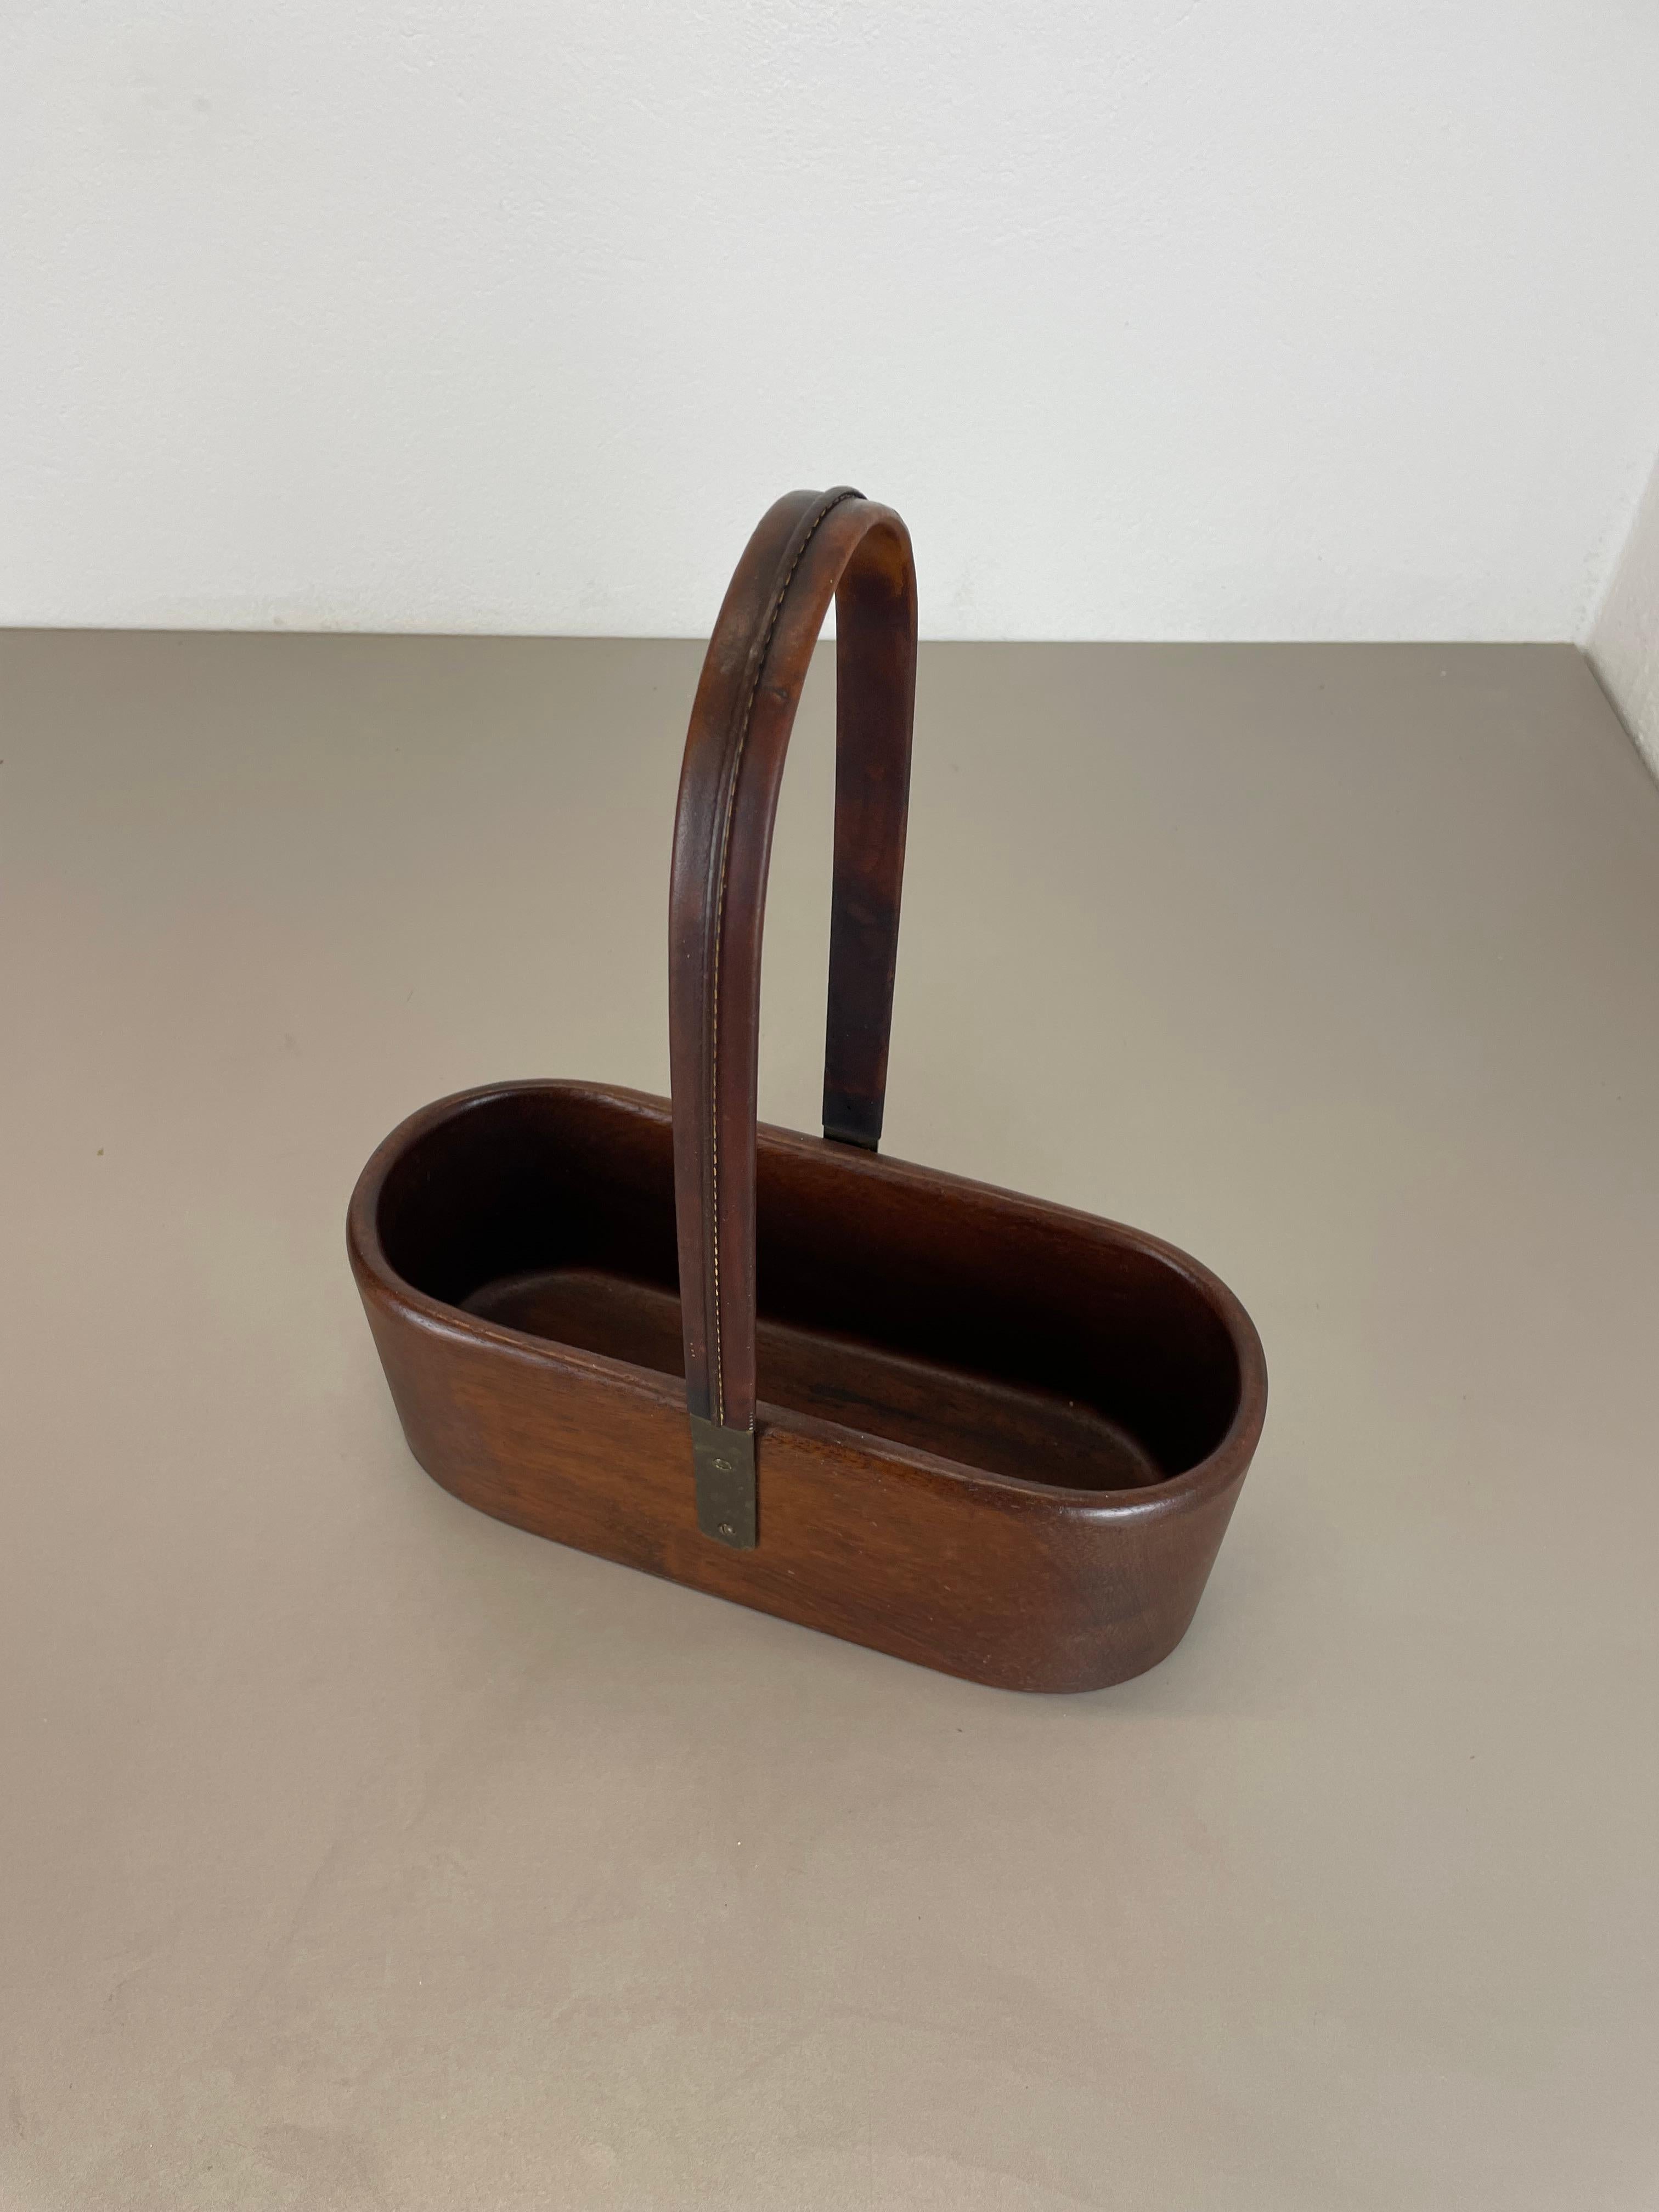 Mid-Century Modern Teak Bottle Holder with Brass and Leather Handle by Carl Auböck, Austria, 1950s For Sale